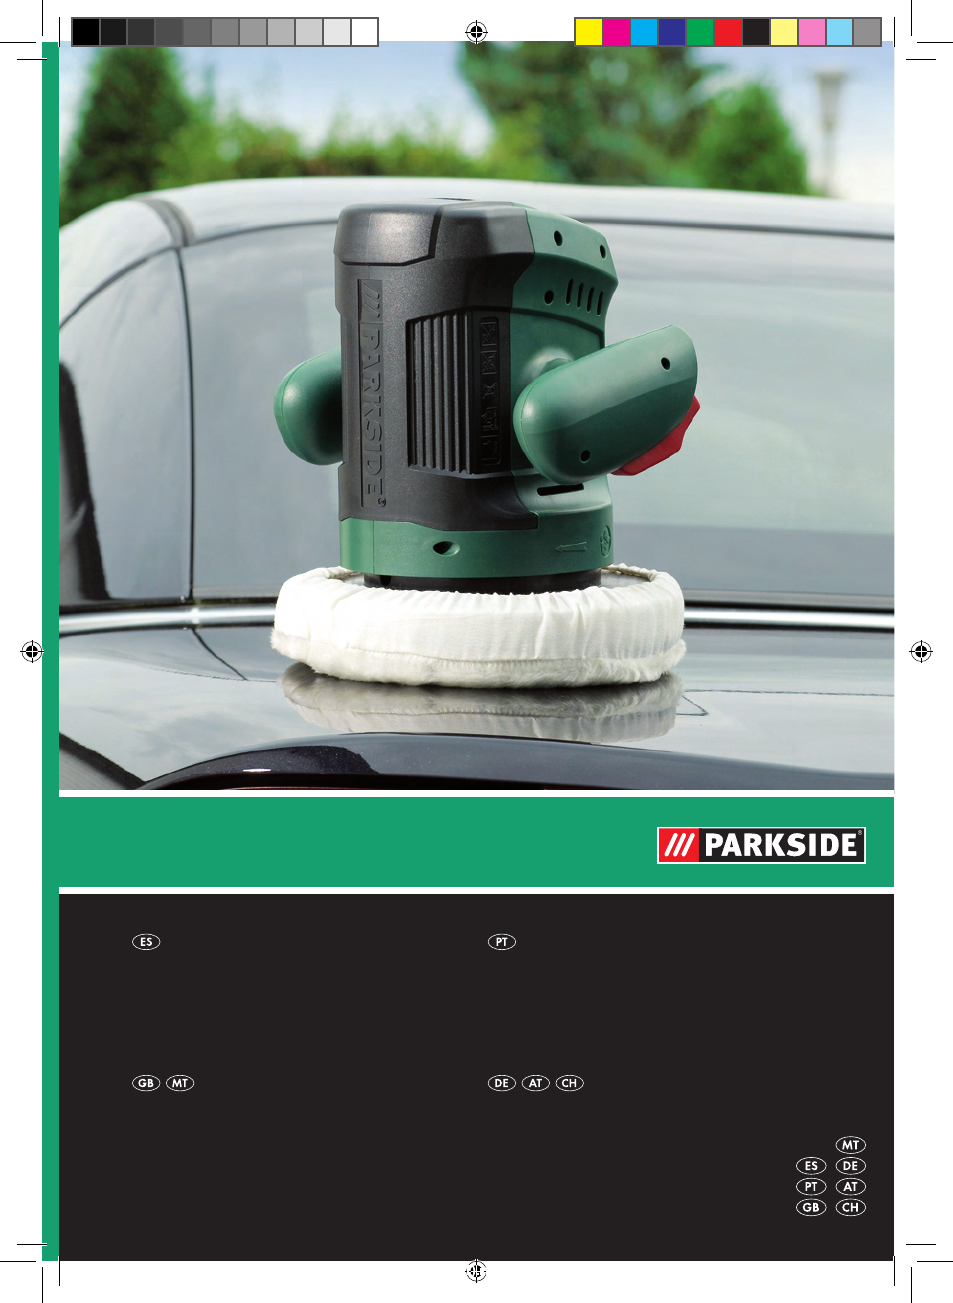 Kh8888, Pulidora recargable para coche, Battery-operated car polisher |  Parkside KH8888 User Manual | Page 2 / 43